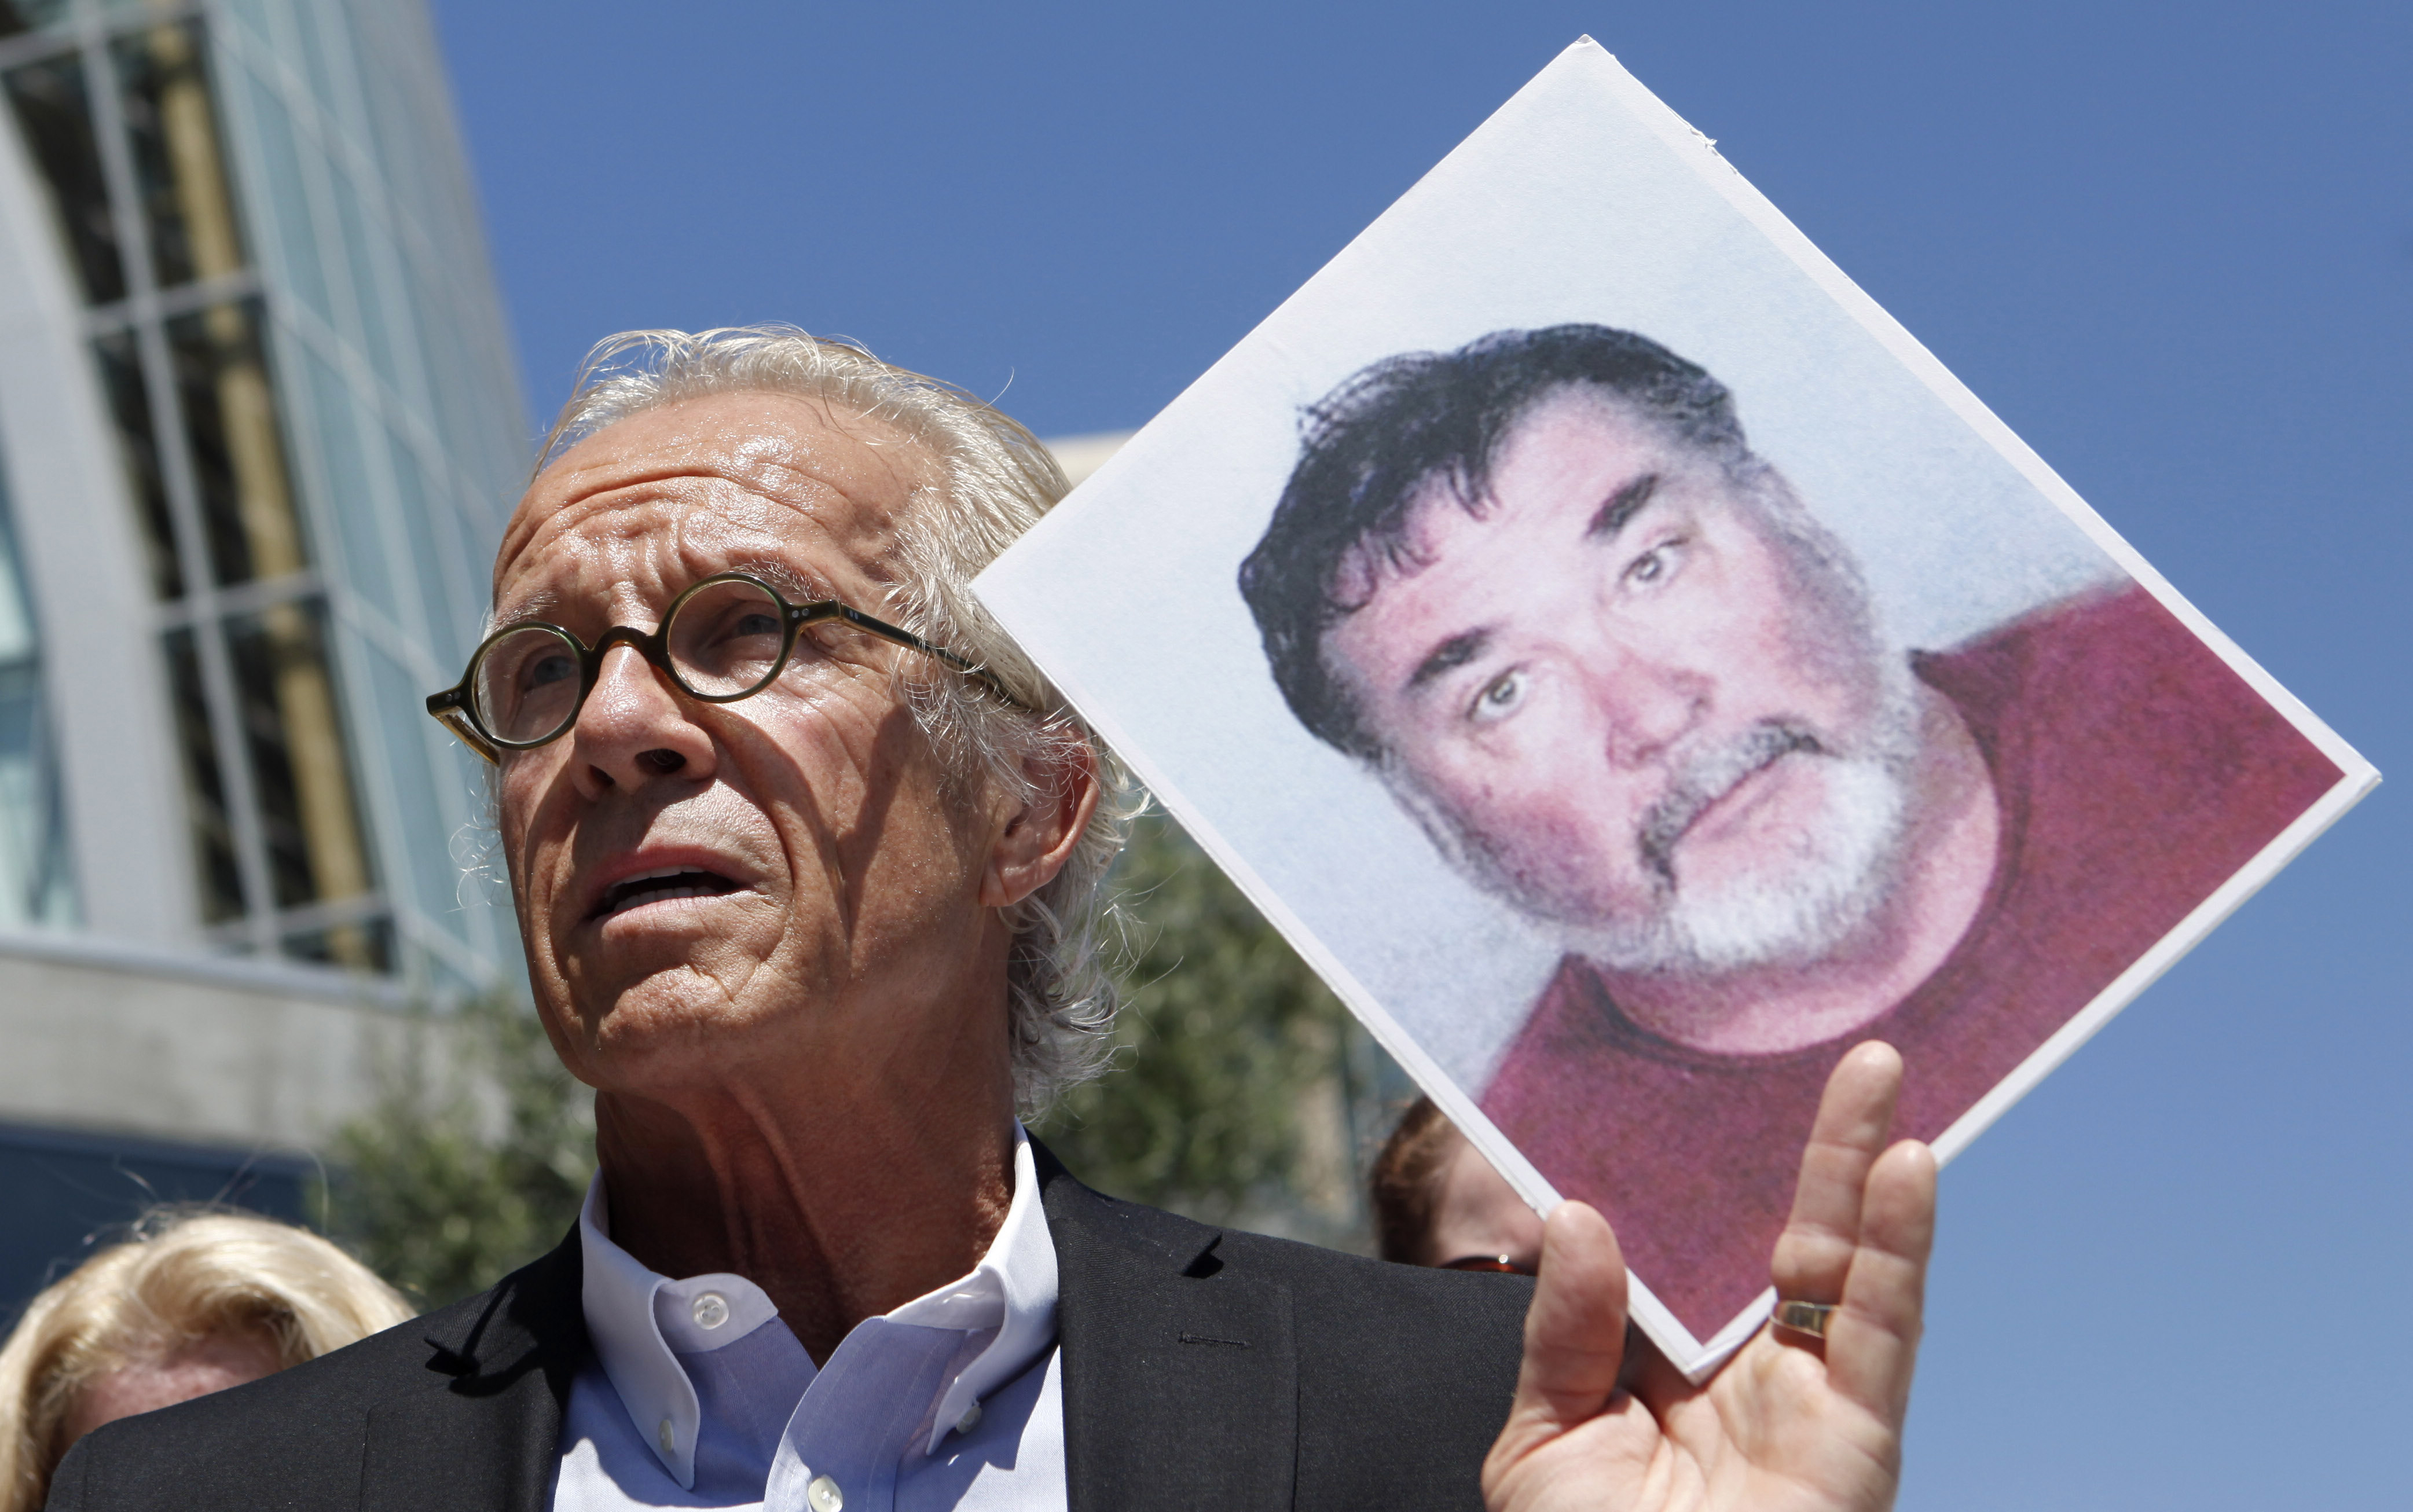 Attorney Jeff Anderson holds up a photo of former priest Stephen Kiesle at a news conference in Oakland, Calif., Wednesday, Aug. 18, 2010. (AP Photo/Jeff Chiu, File)